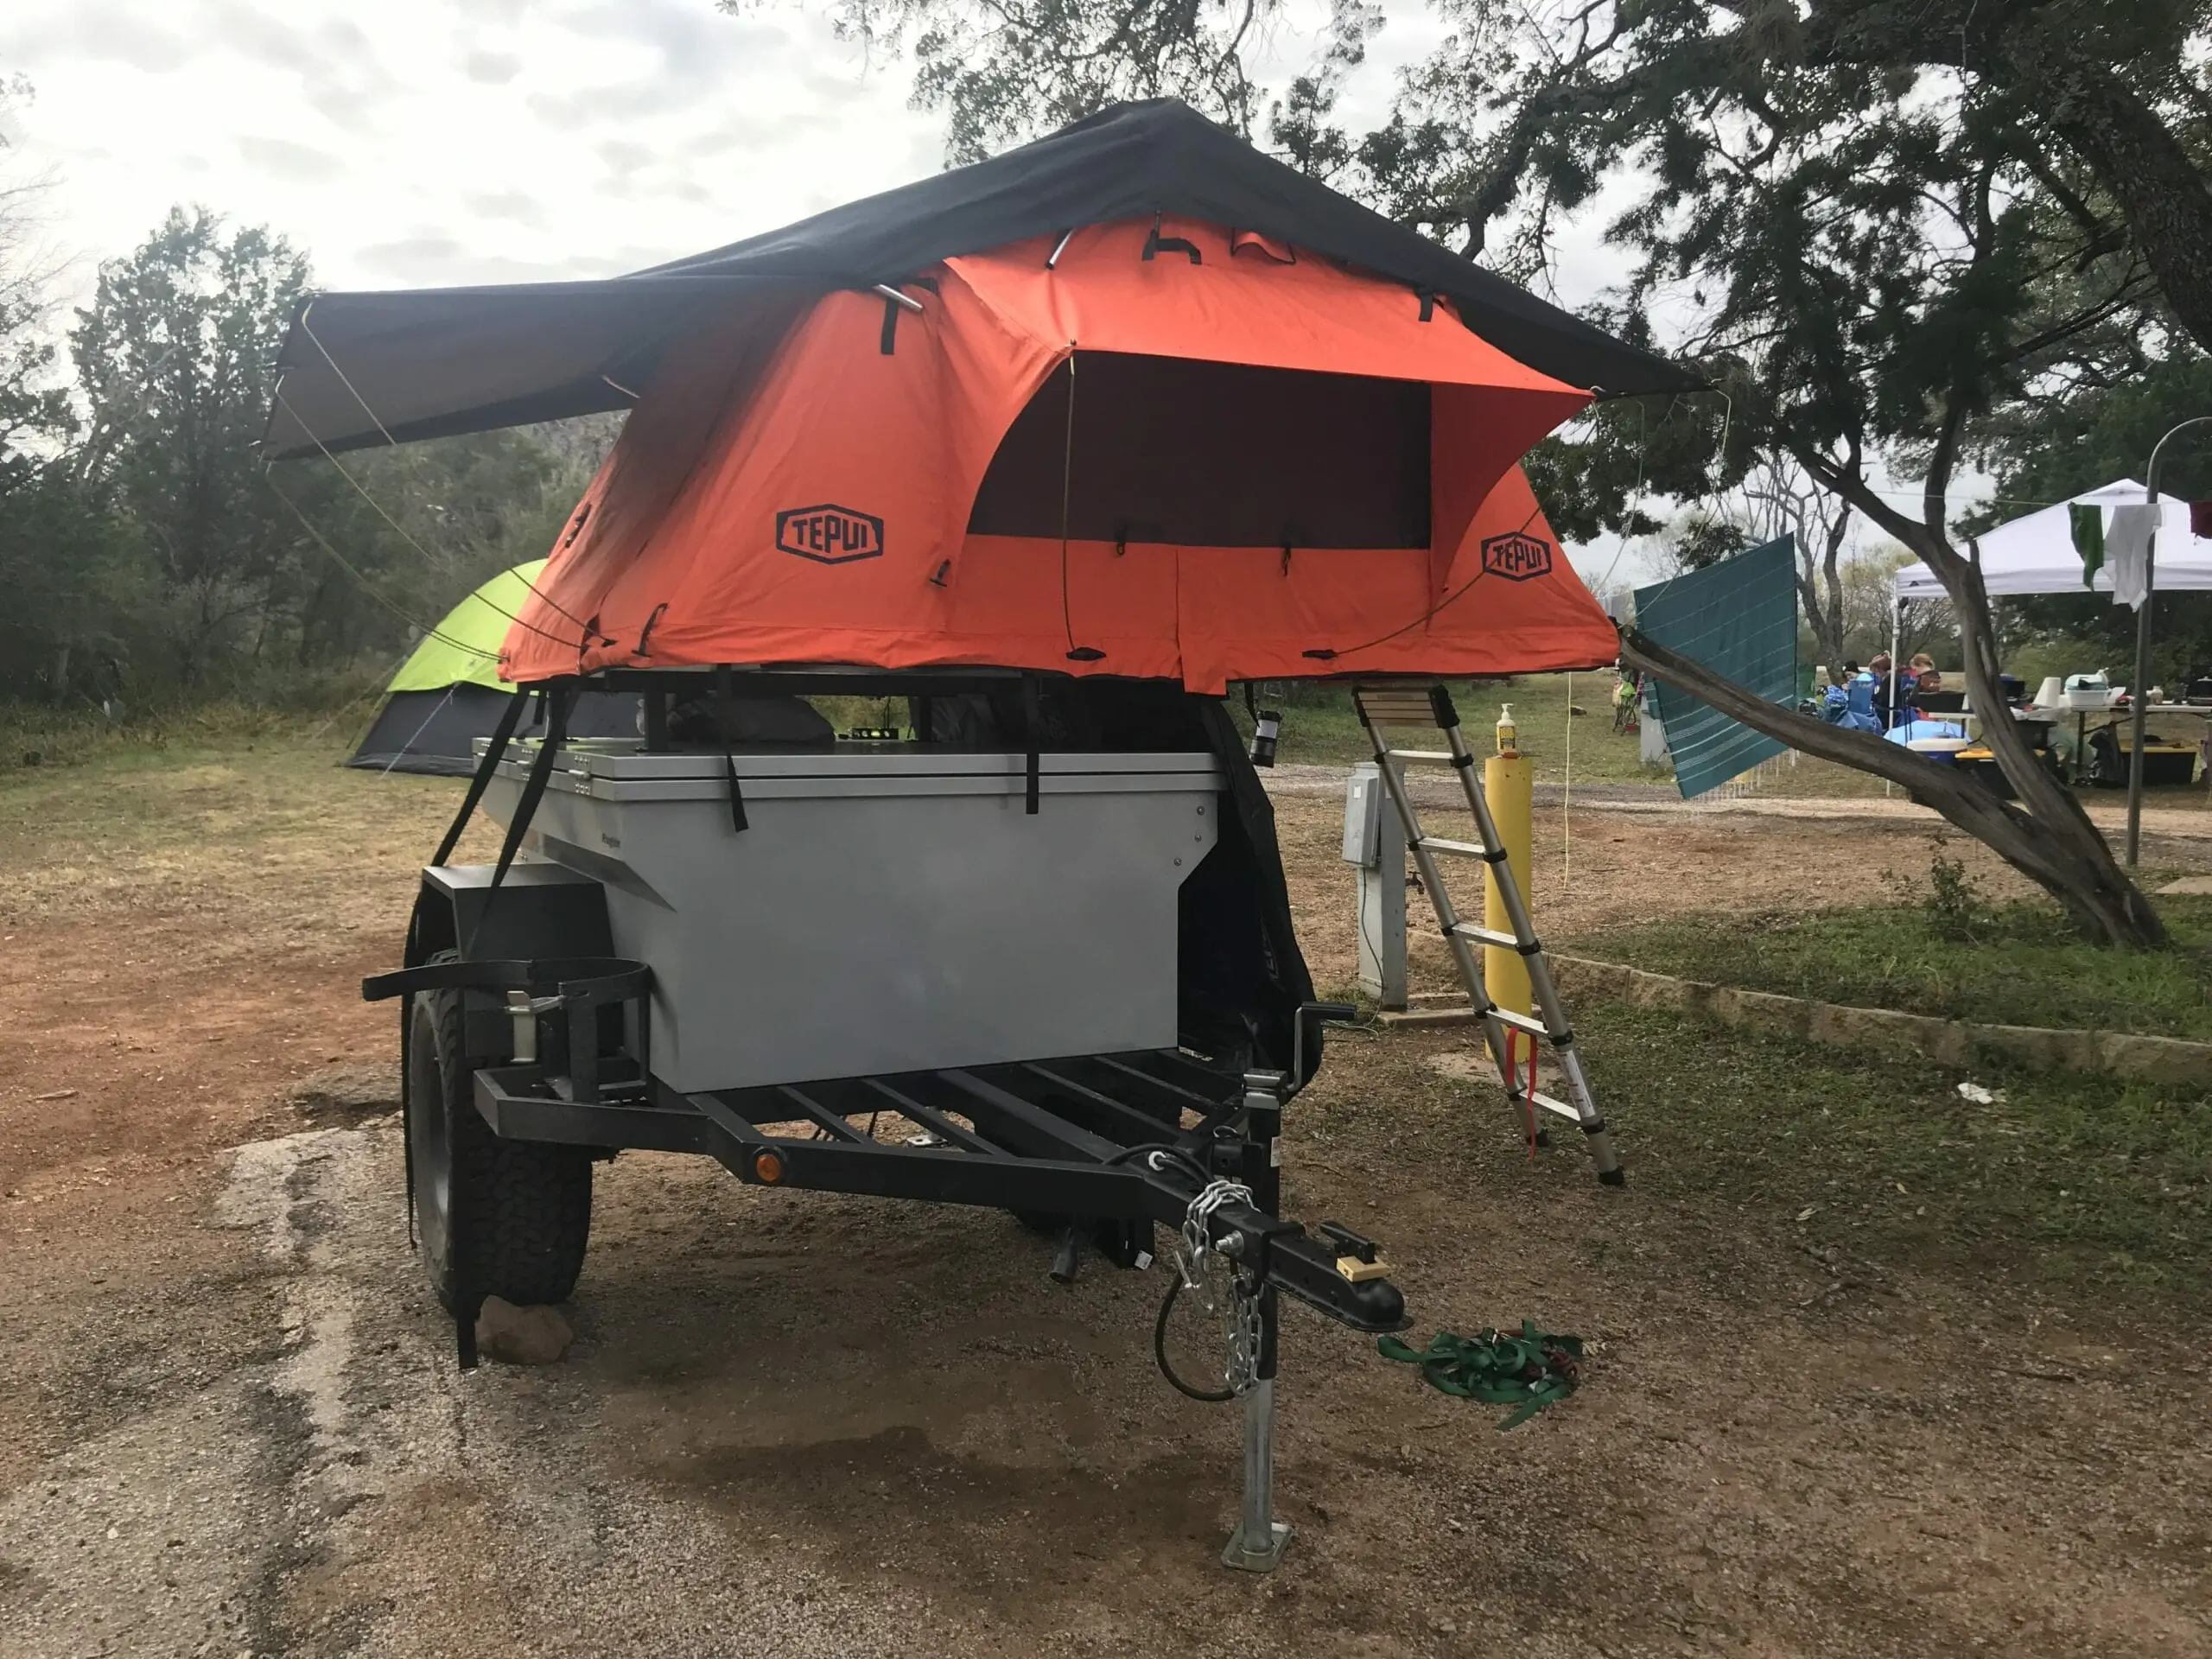 Trailer Mounted RTT at campsite